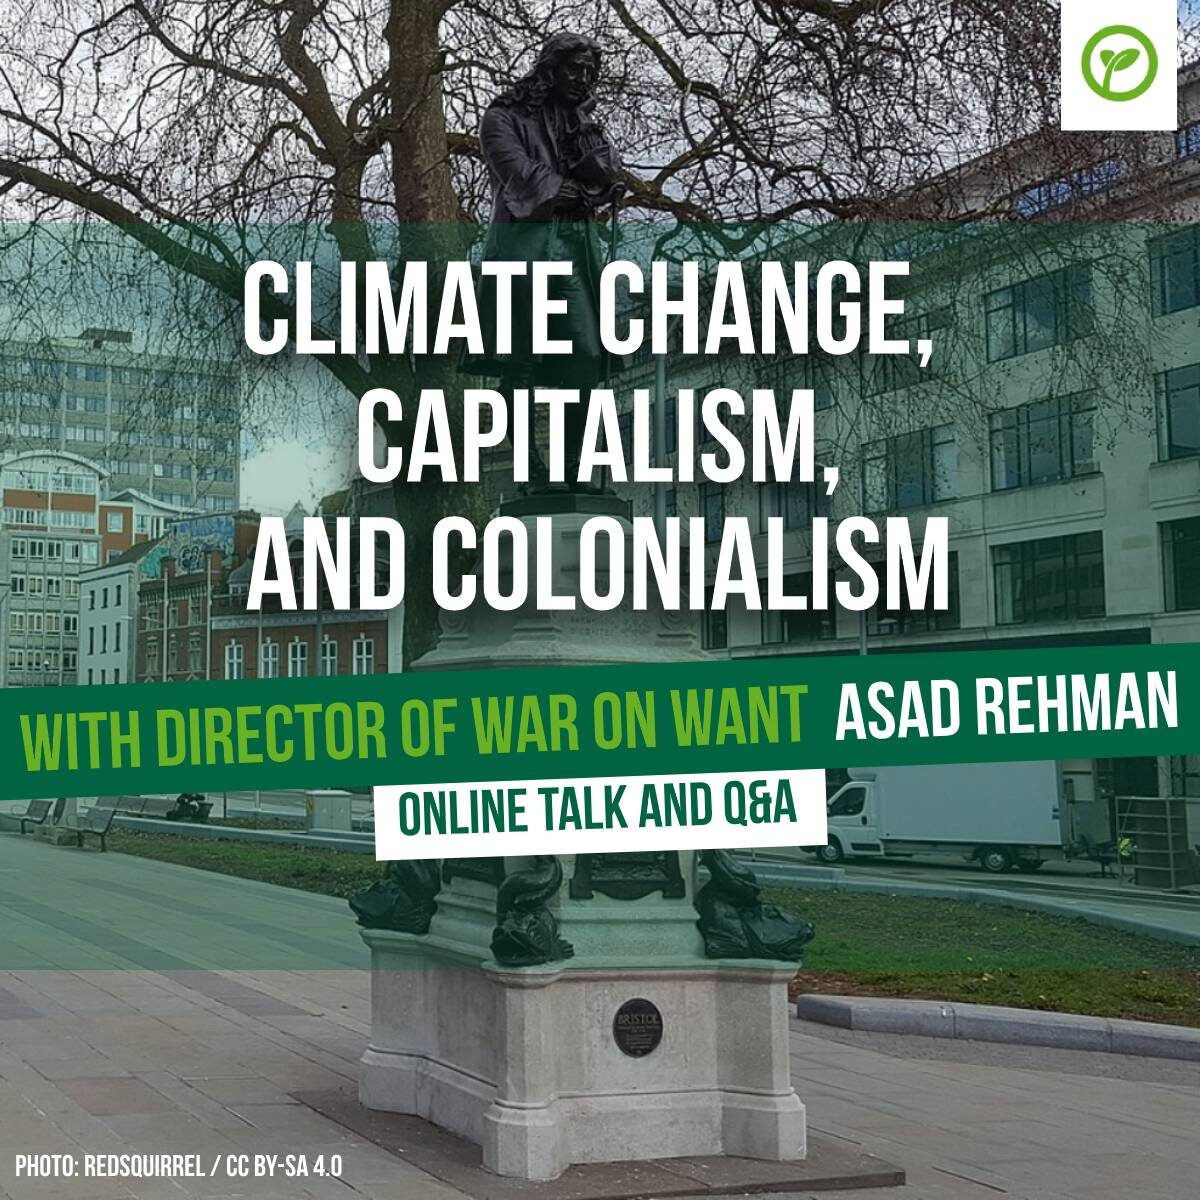 Climate Change, Capitalism, and Colonialism with Director of War on Want Asad Rehman. Online talk and Q&A. Photo: RedSquirrel - CC-BY-4.0